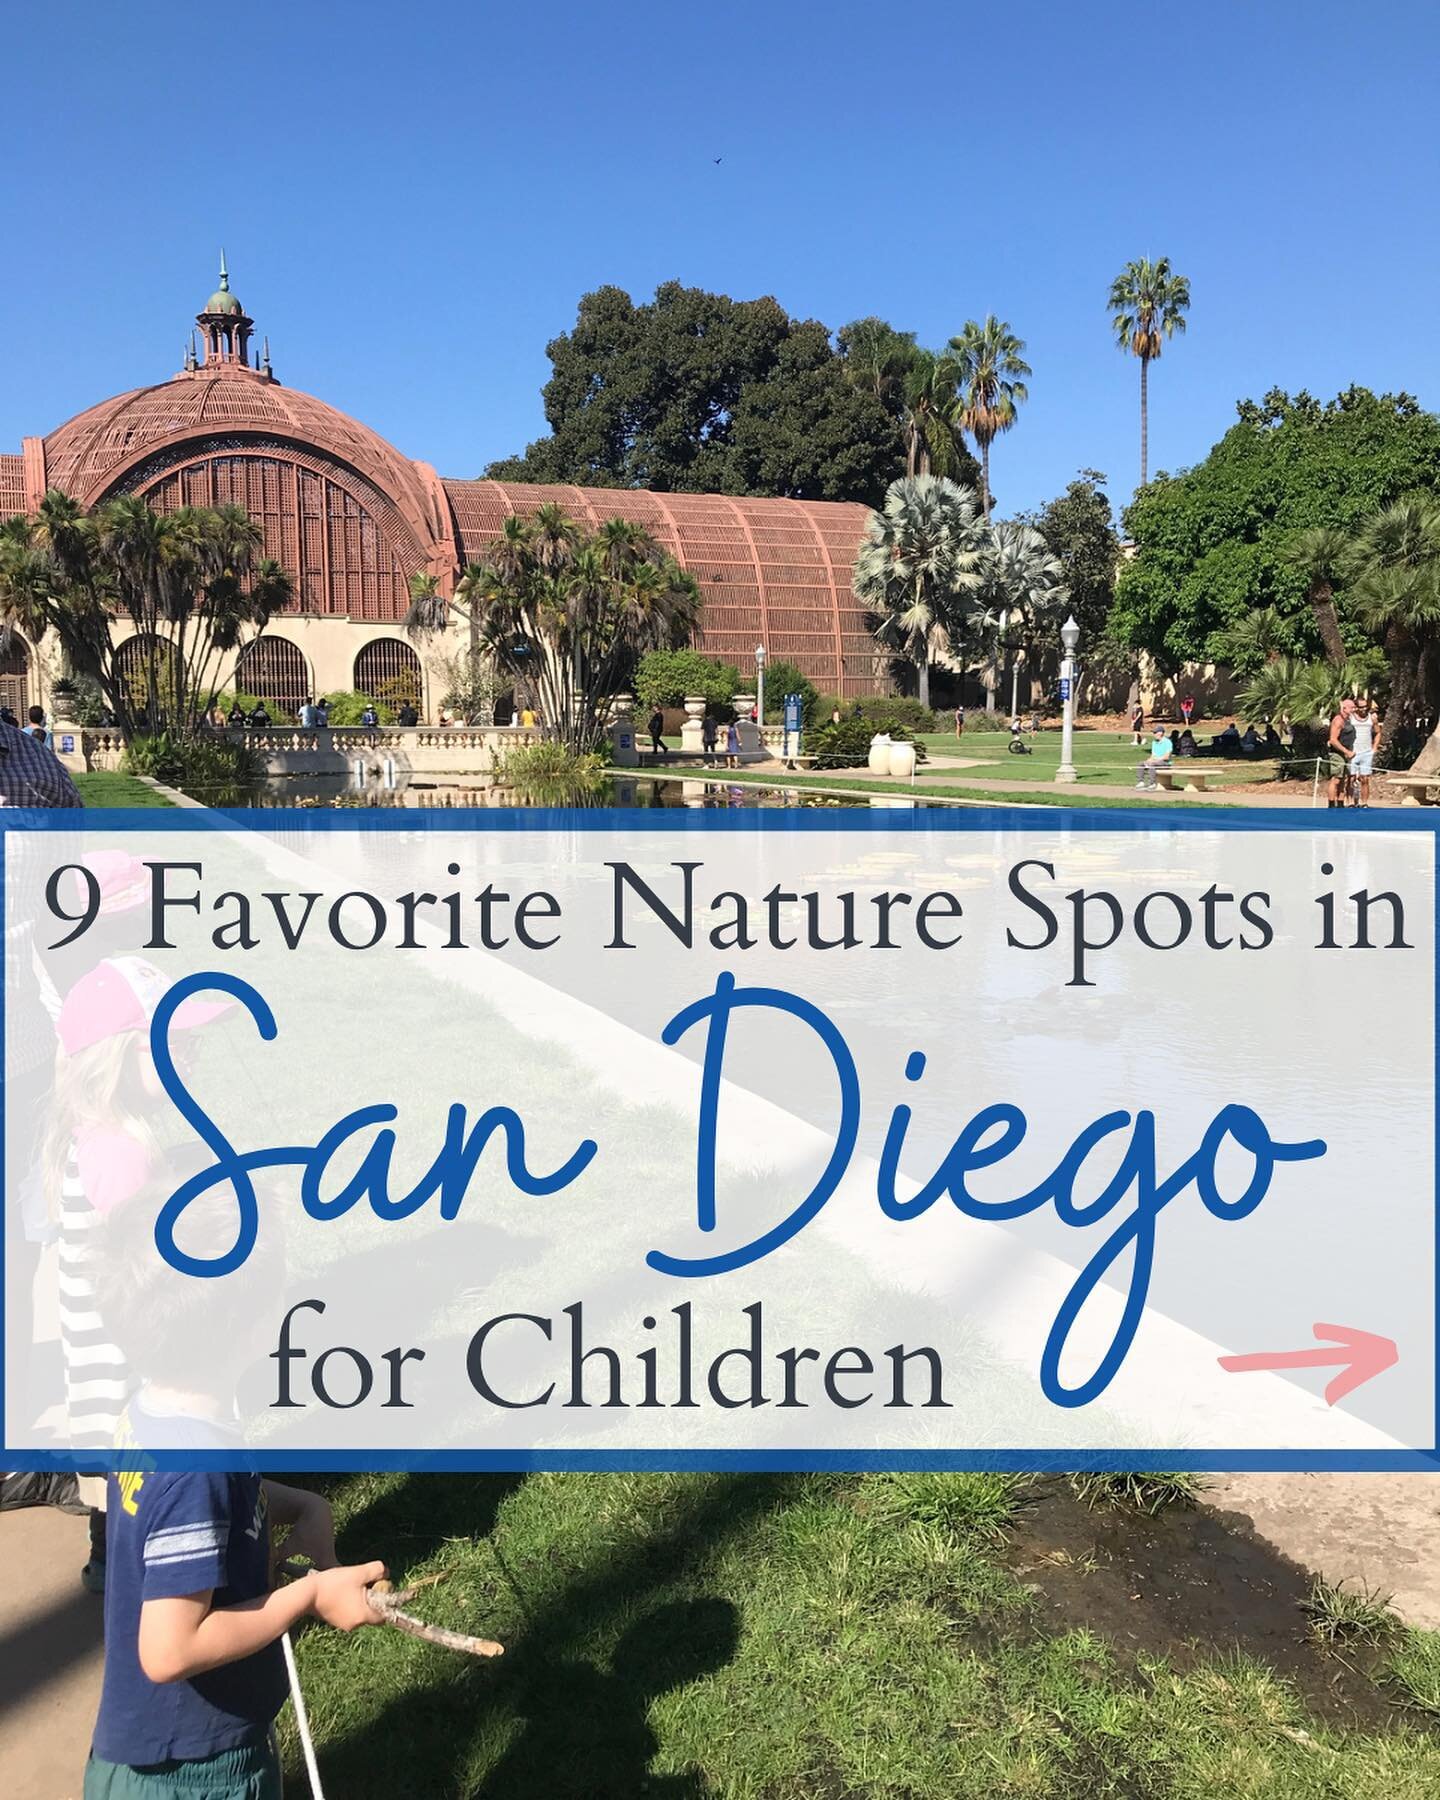 Looking for somewhere to get outside with your family? 

My husband was born and raised in San Diego, and I lived here for 5 years - it&rsquo;s where we got married and I became a mom! Now we live in the Riverside area + return to San Diego regularly